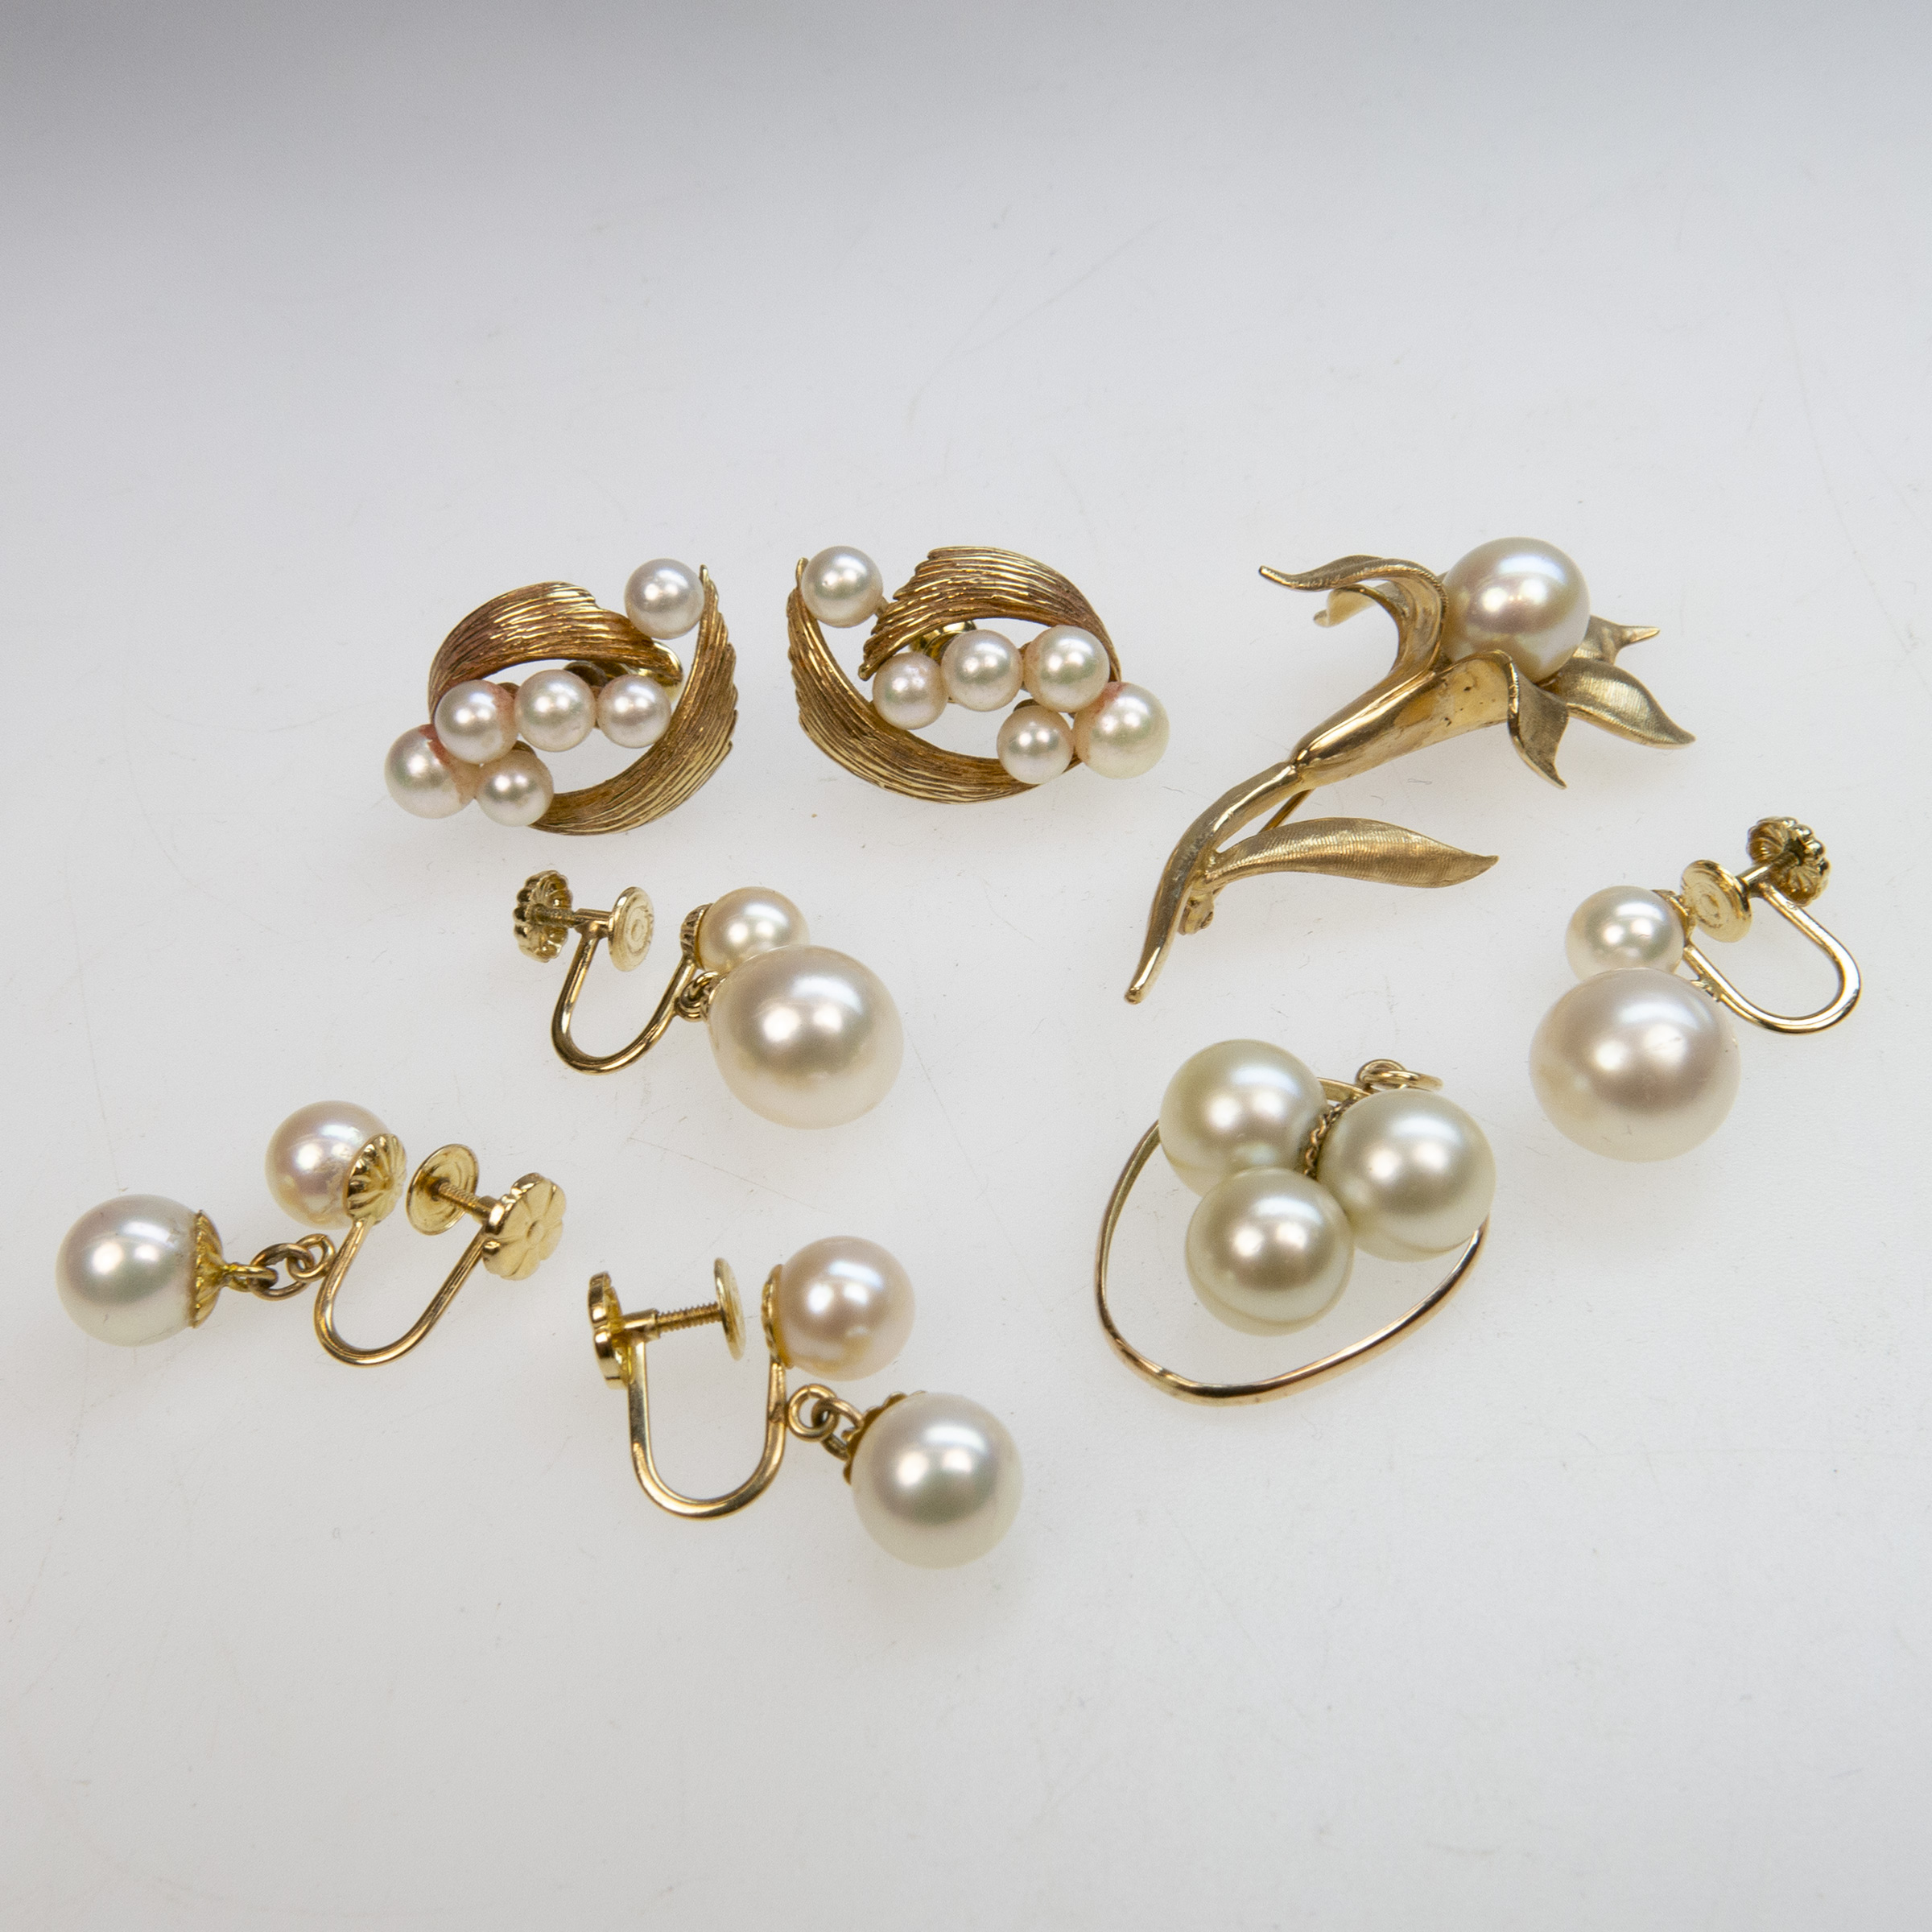 14k Yellow Gold Brooch and 2 Pairs of Screwback Earrings